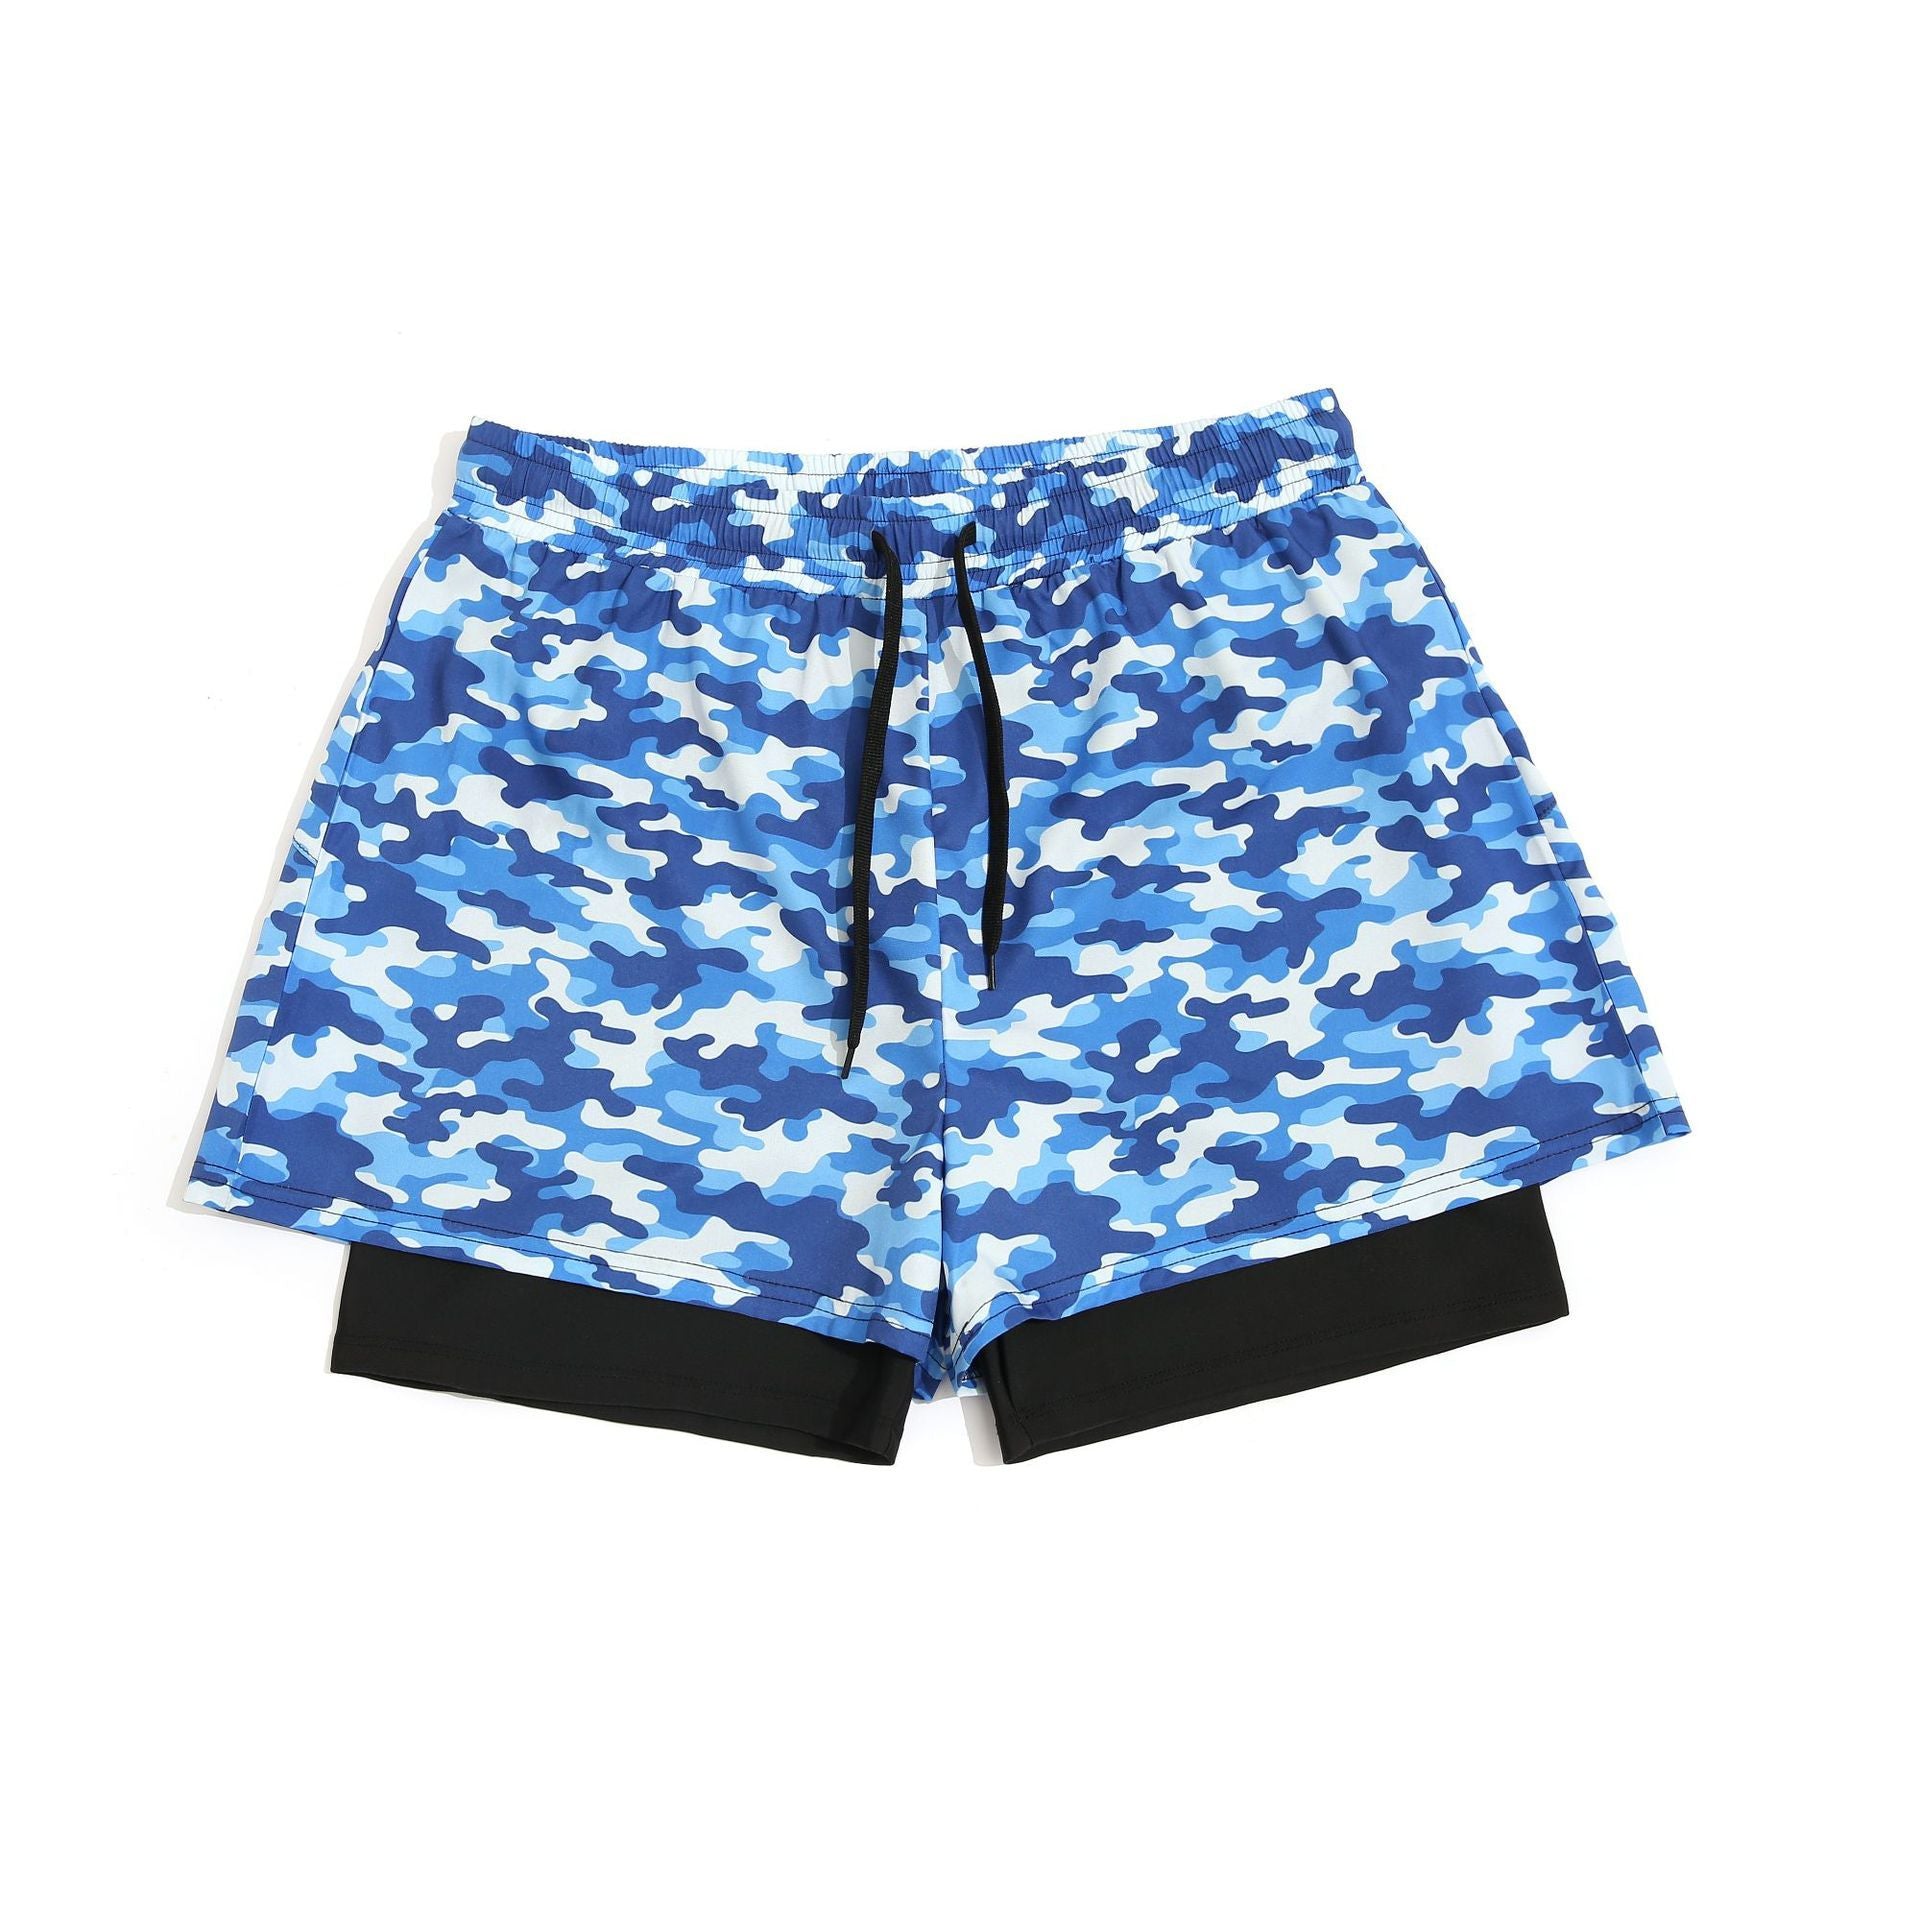 Style three - Loose Swimming Trunks Summer Printed Double Layer Beach Shorts for Men - mens swim shorts at TFC&H Co.